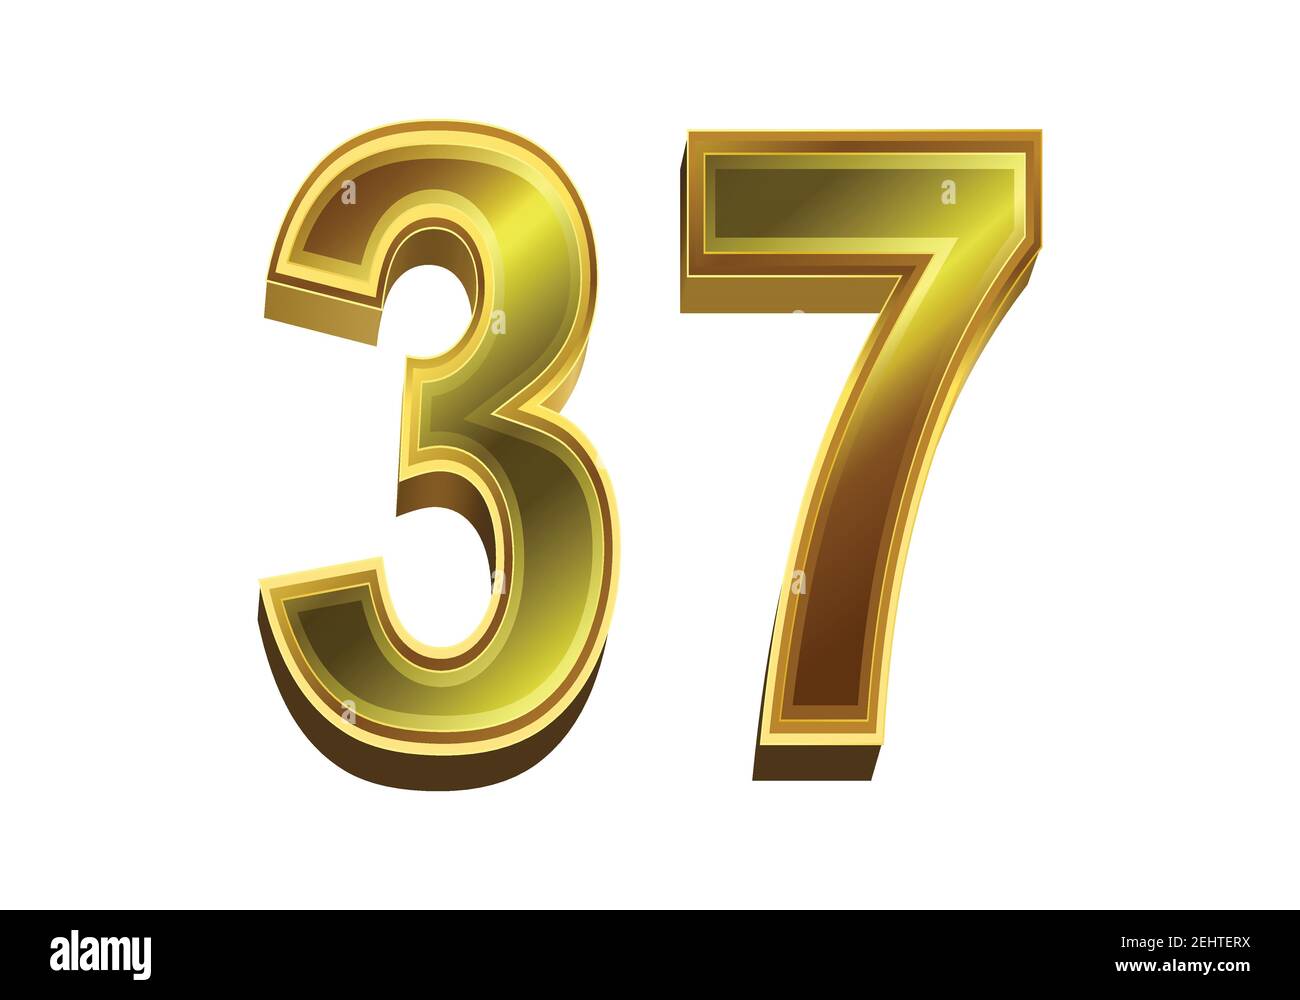 3d-golden-number-37-isolated-on-white-background-stock-vector-image